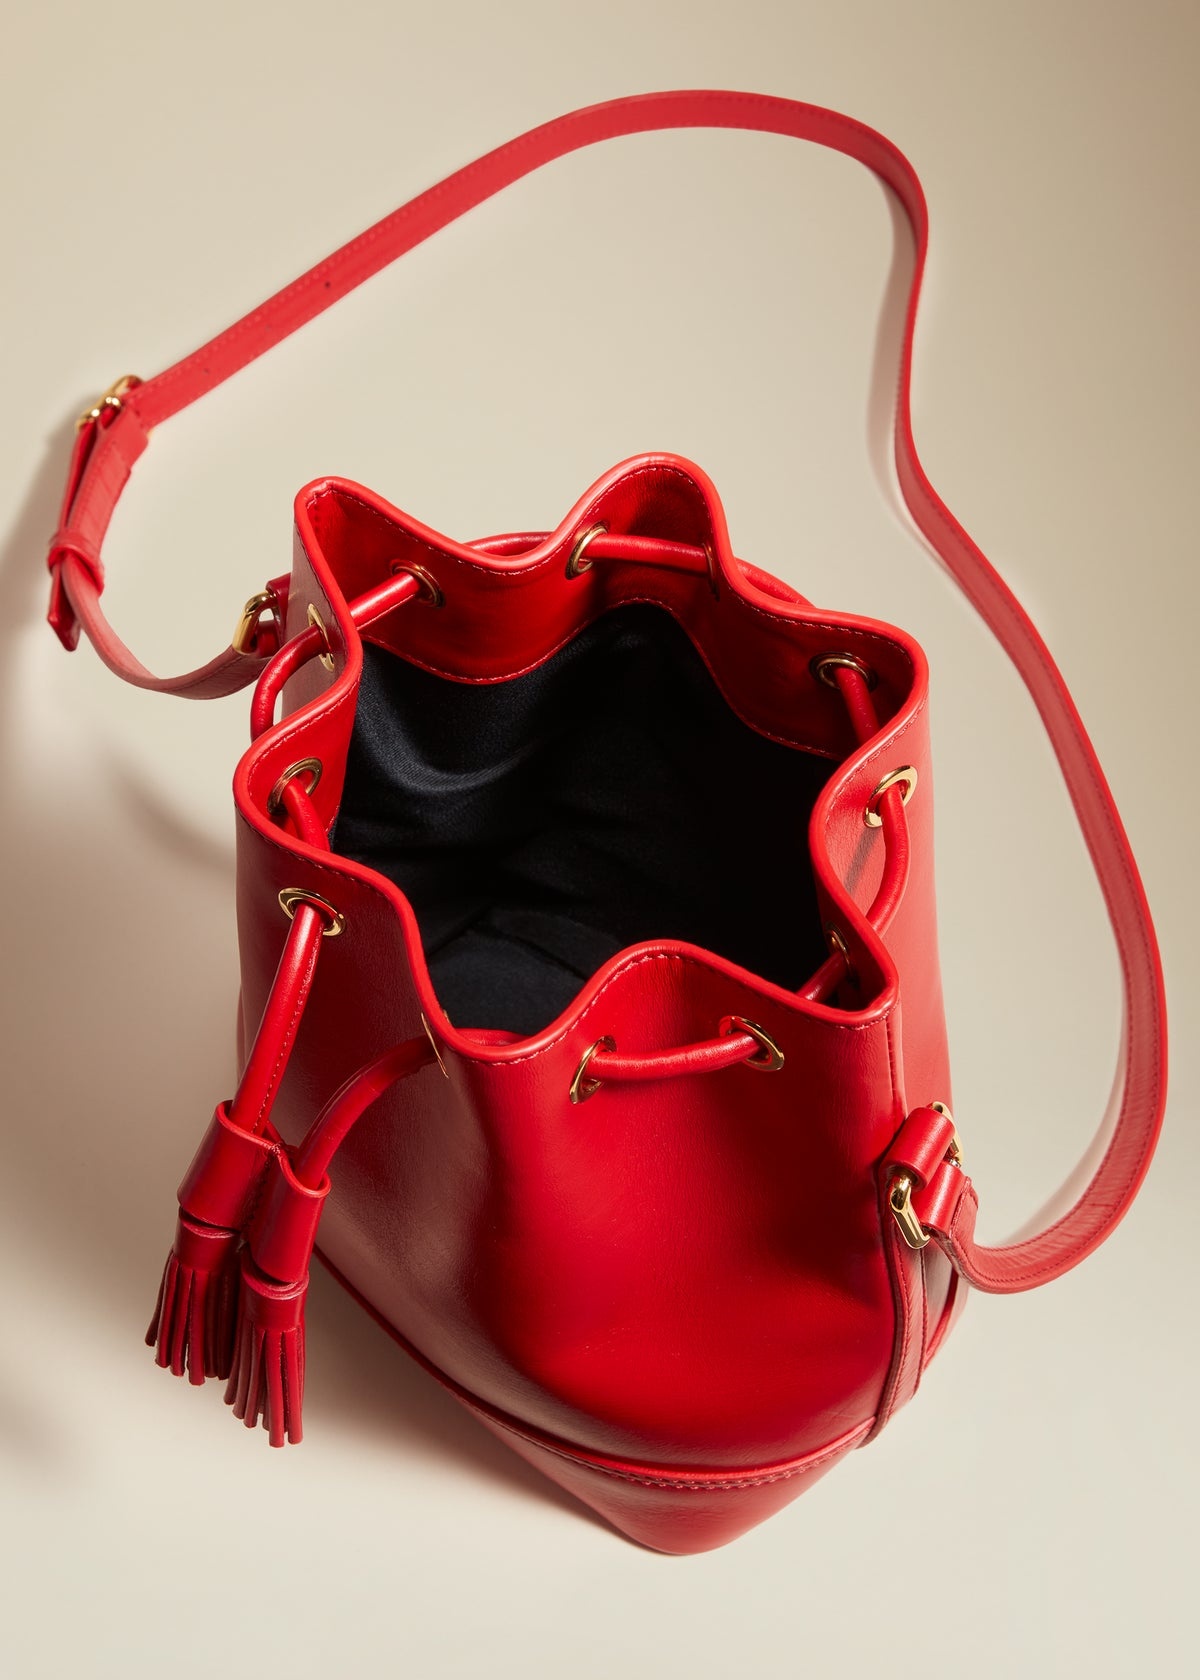 The Small Cecilia Crossbody Bag in Scarlet Leather - 4